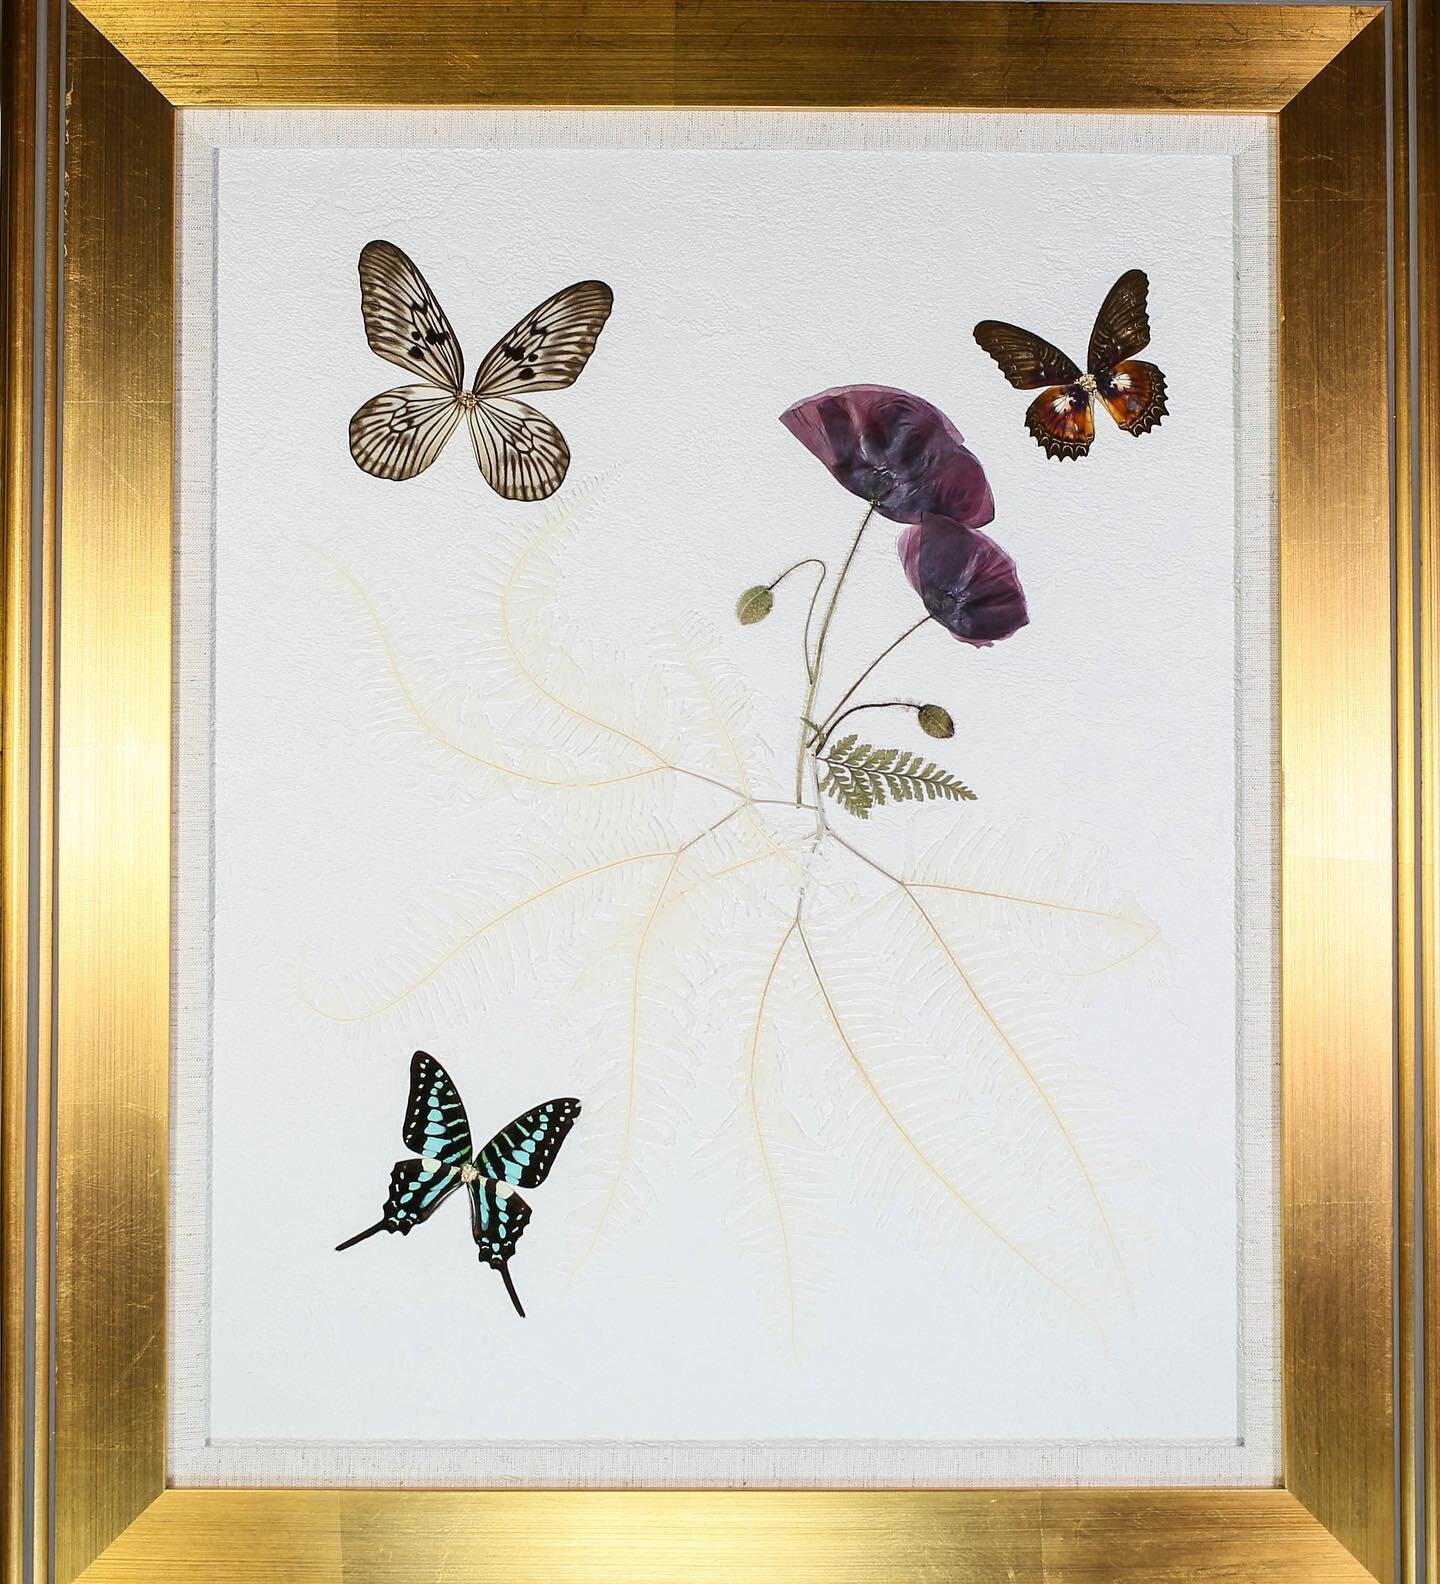 Some of the larger pieces we have made with butterflies and real preserved flowers and ferns! 

Buginthebox.net

🌸🦋❤️🦋❤️🦋🌸

#oddities #entomologyart
#framedbutterfly #walldecor #odditiesforsale
#entomology #insecttaxidermy #insectart #taxidermya